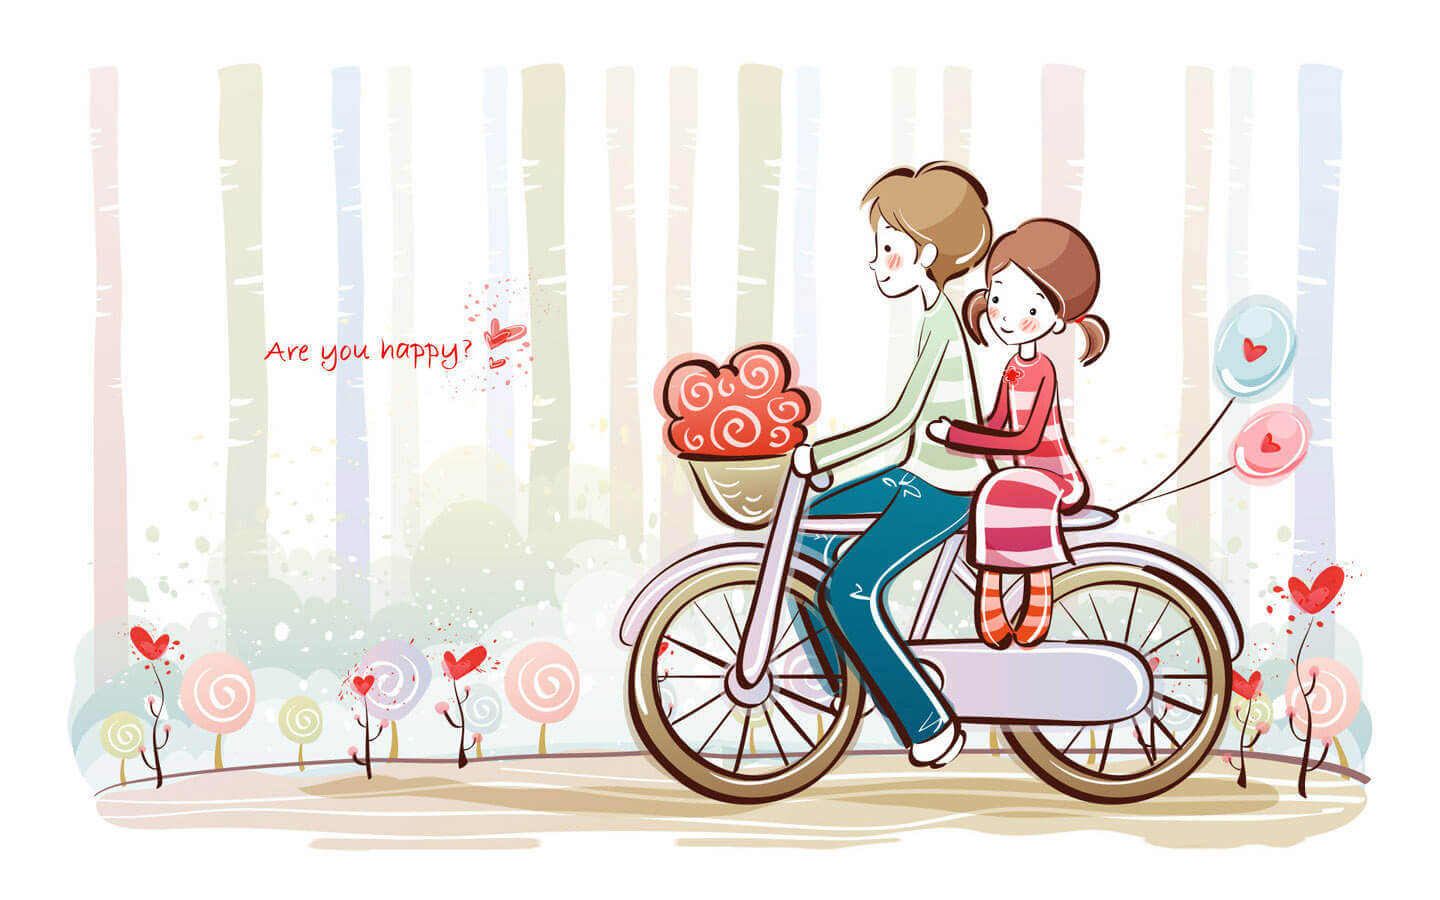 Happy Valentine S Day HD Wallpaper Background Pictures Cgfrog